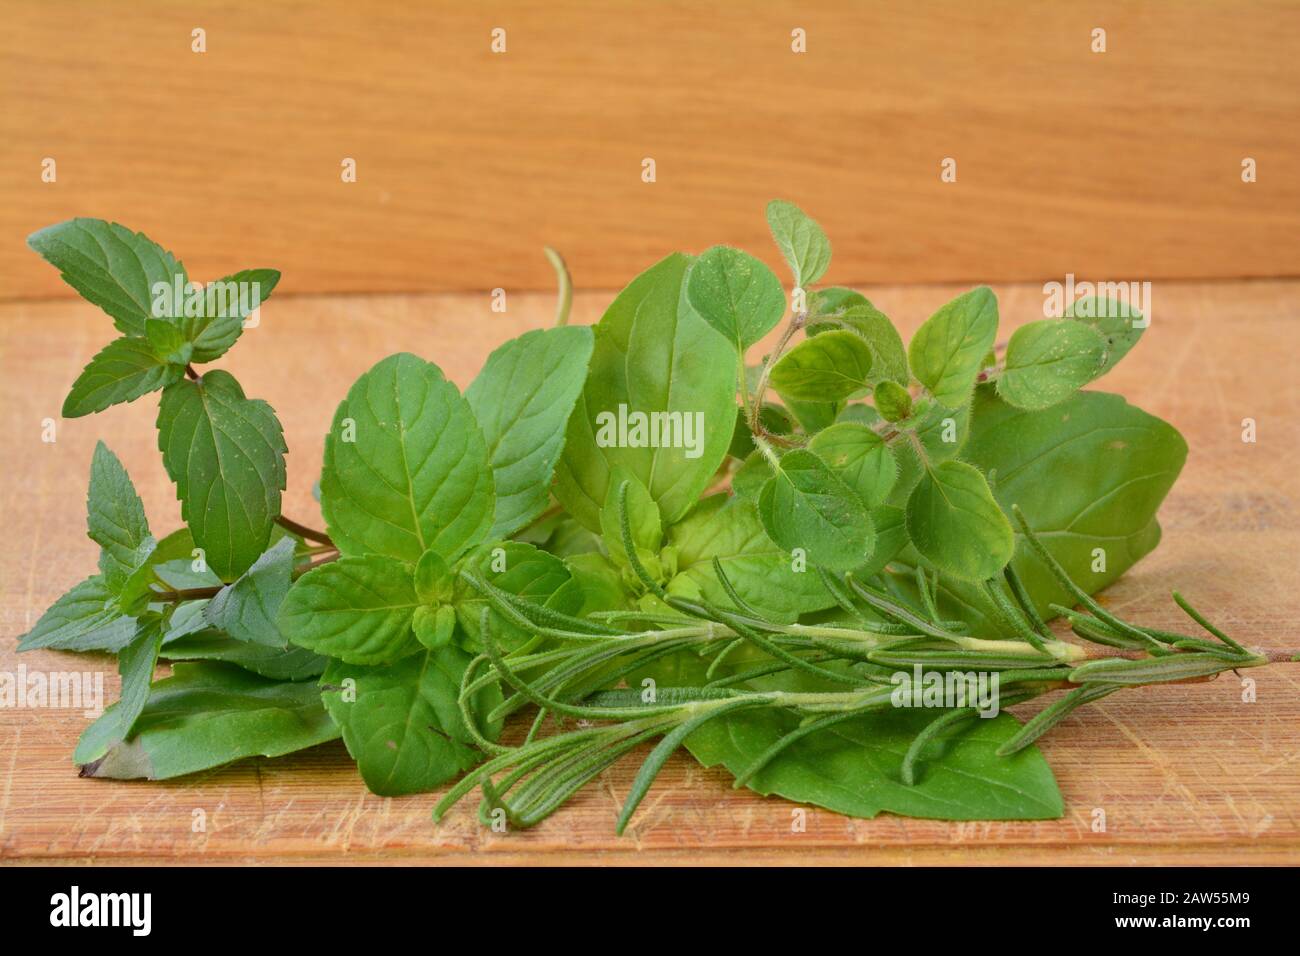 Fresh green aromatic plants, basil, rosemary, peppermint,  mojito mint and oregano in a bunch on wooden background Stock Photo